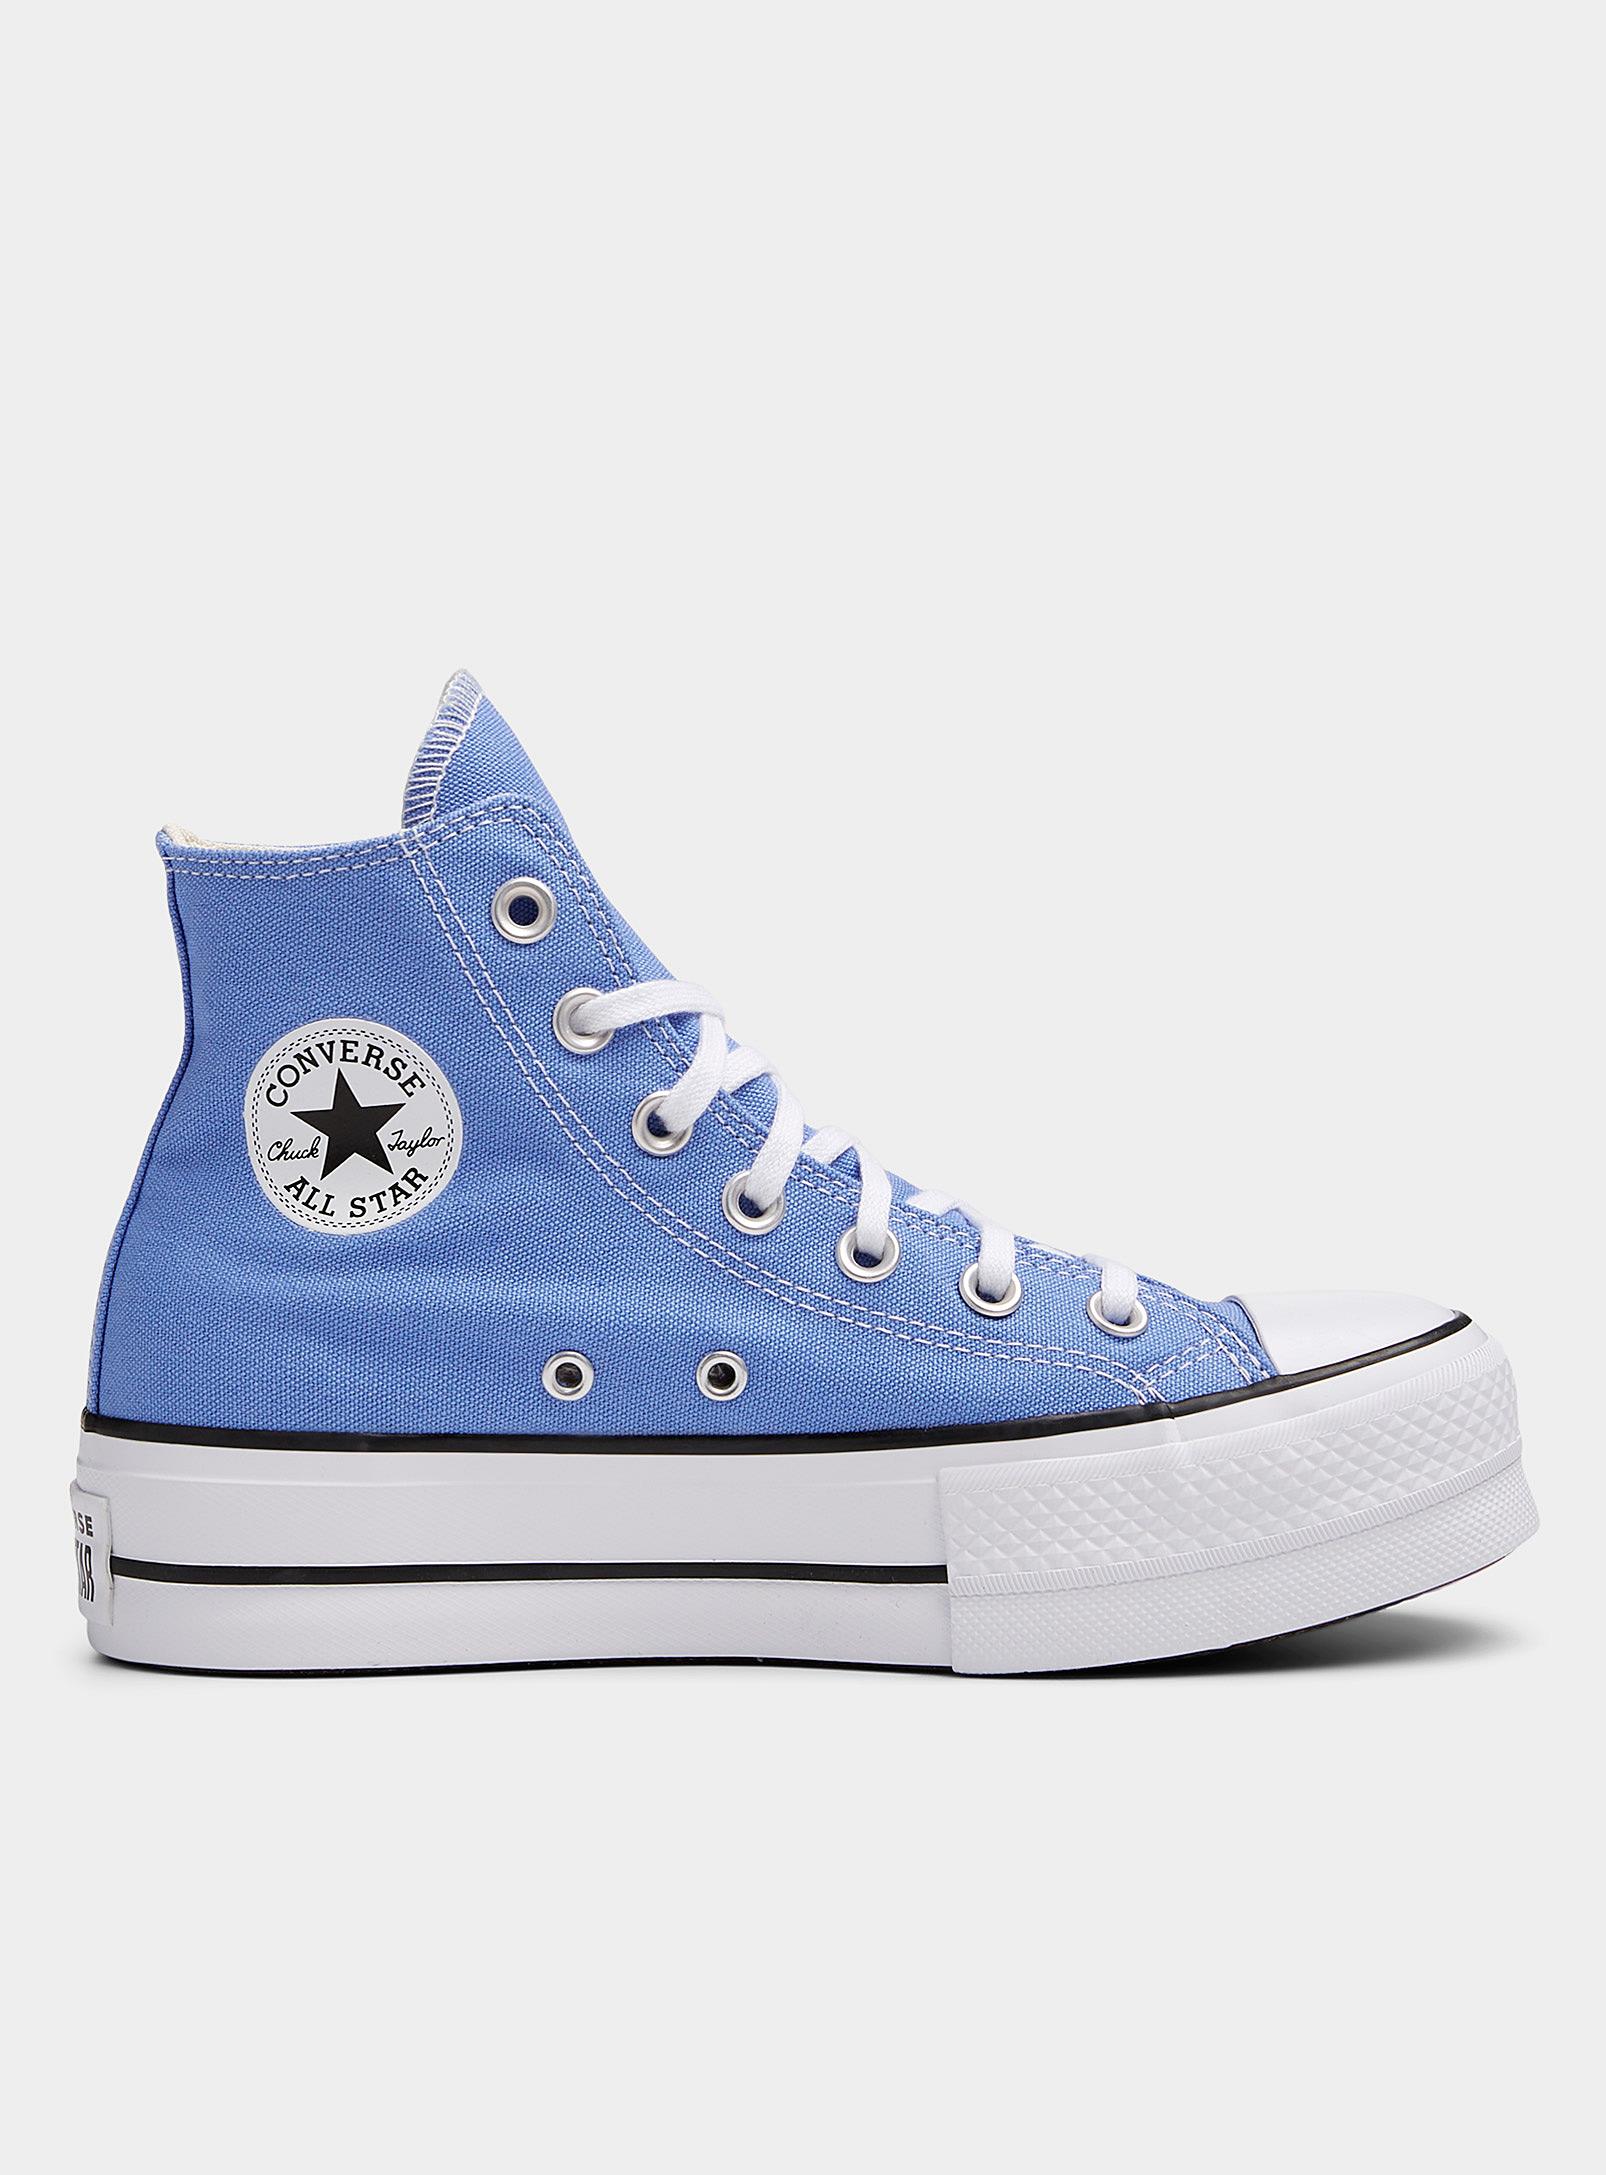 Converse Chuck Taylor All Star Lift High Top Periwinkle Platform Sneakers  Women in Blue | Lyst